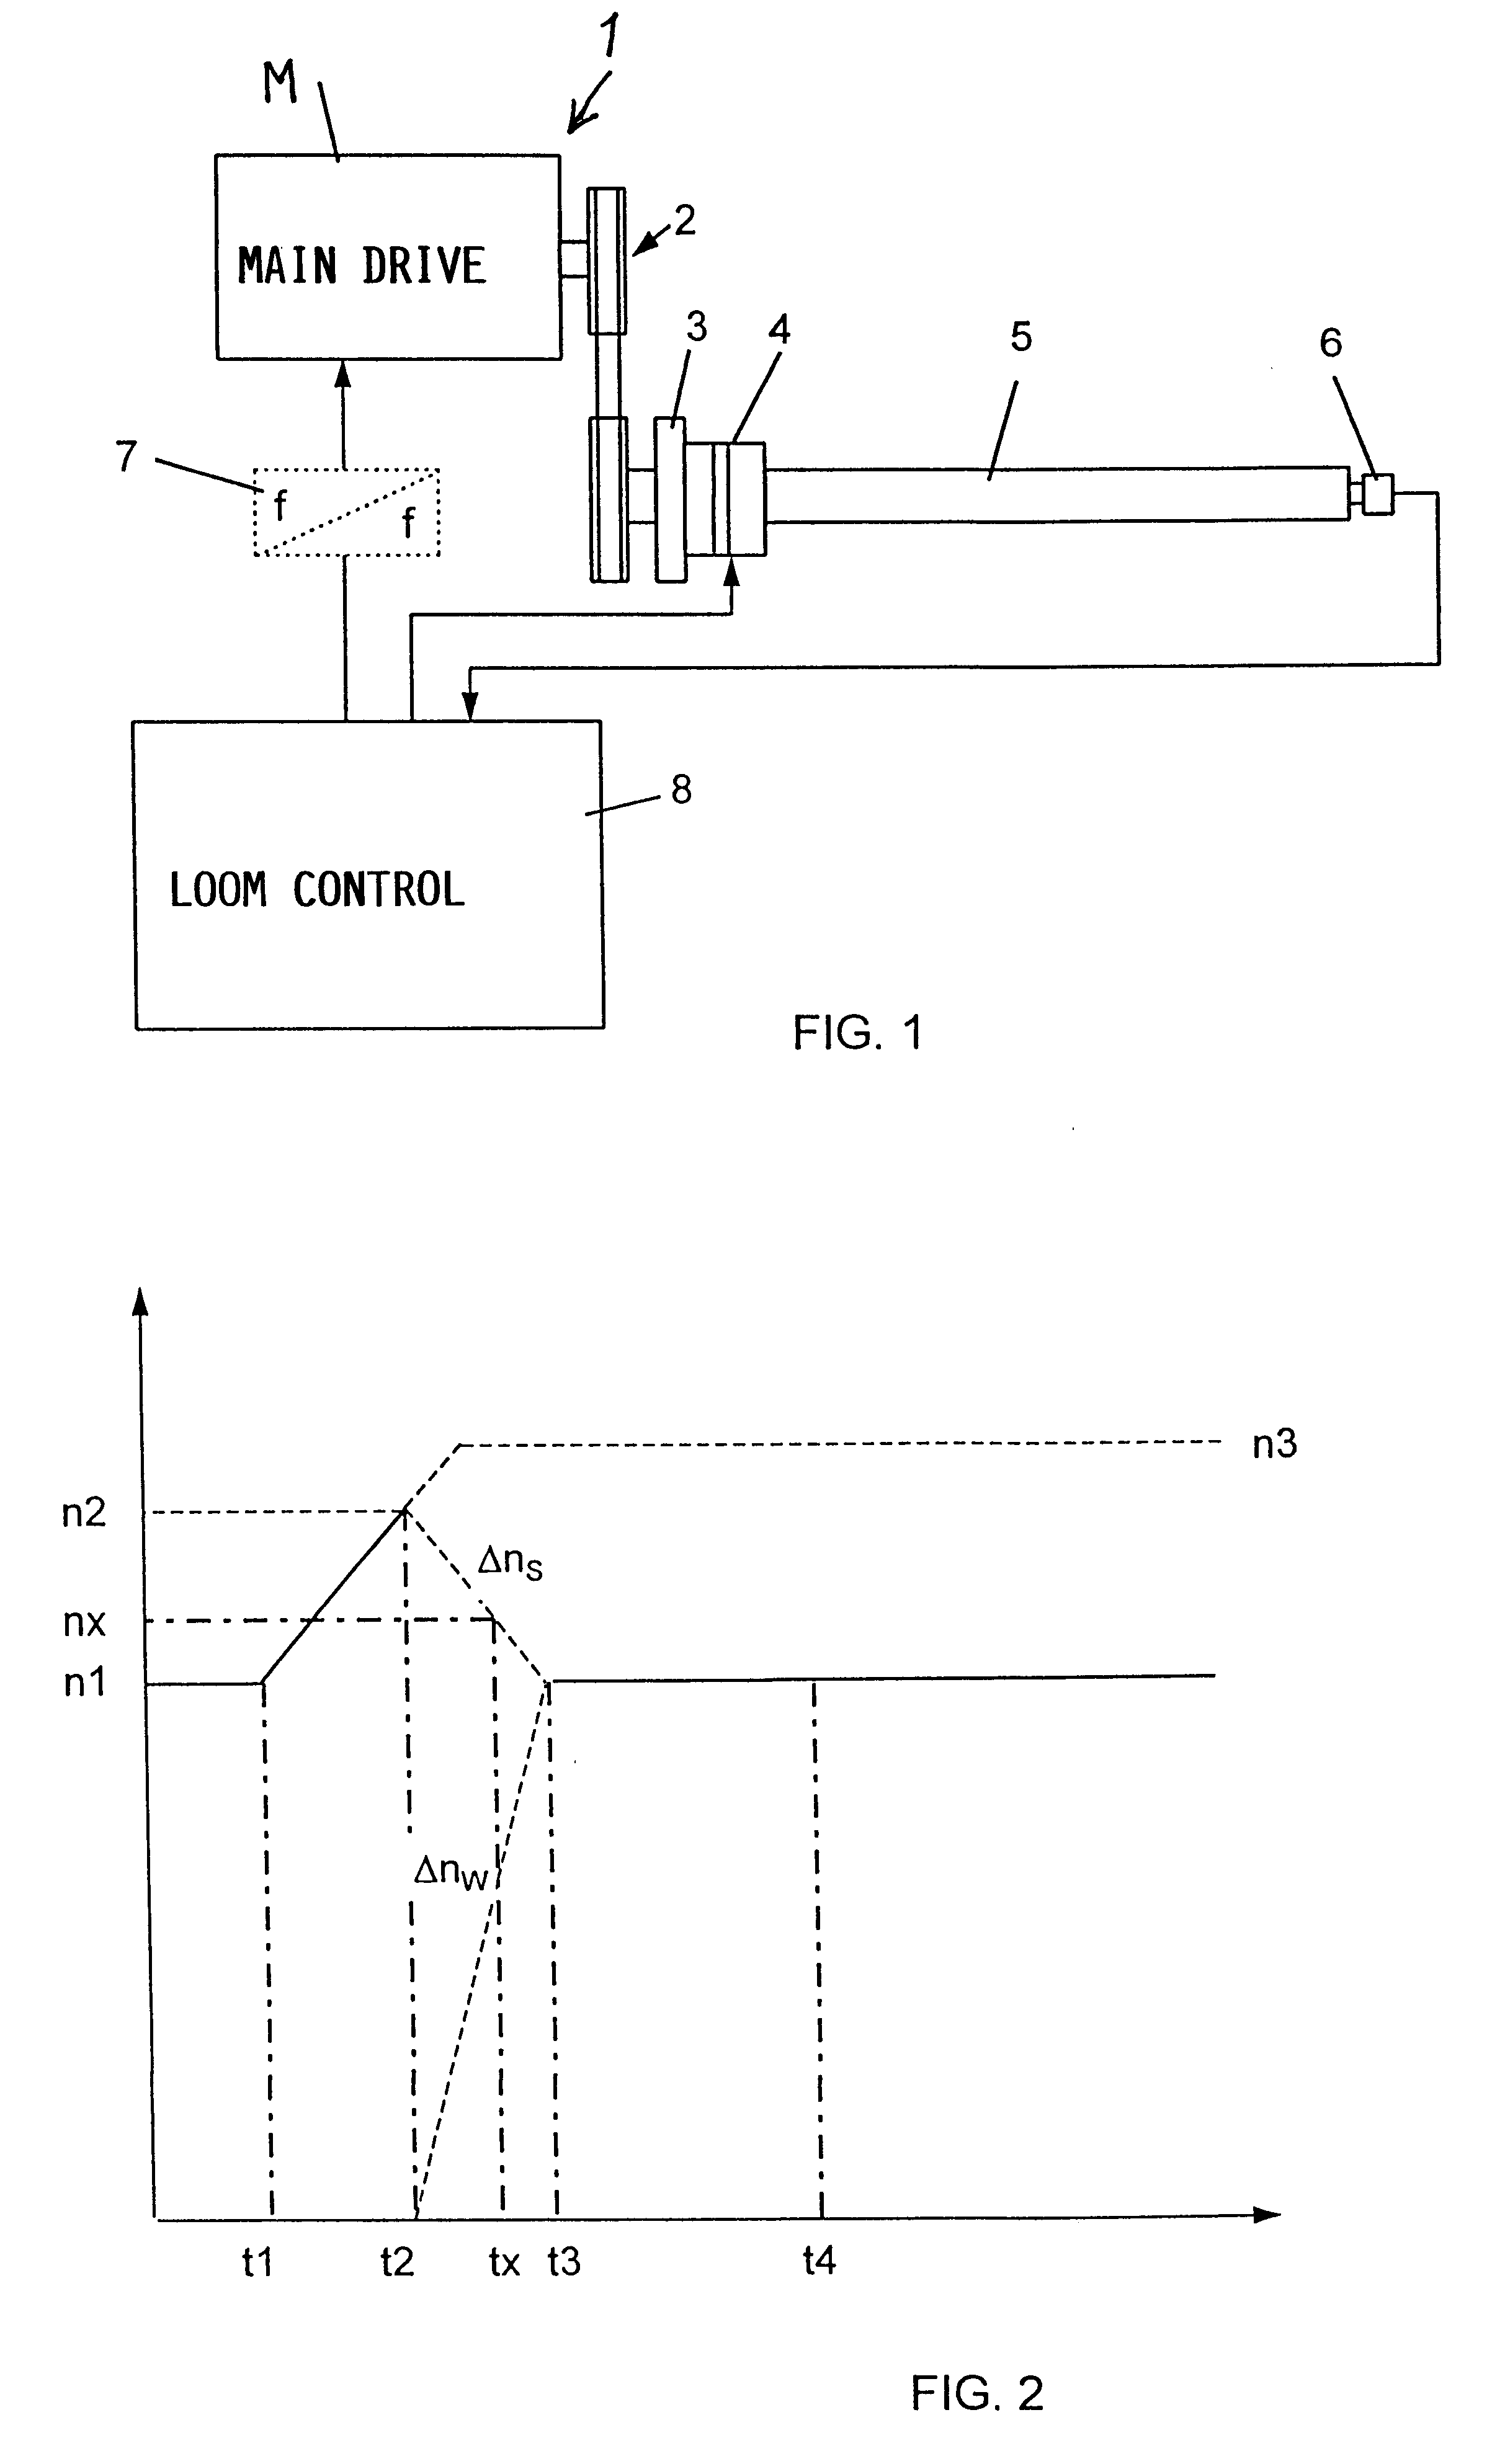 Method for starting a power loom